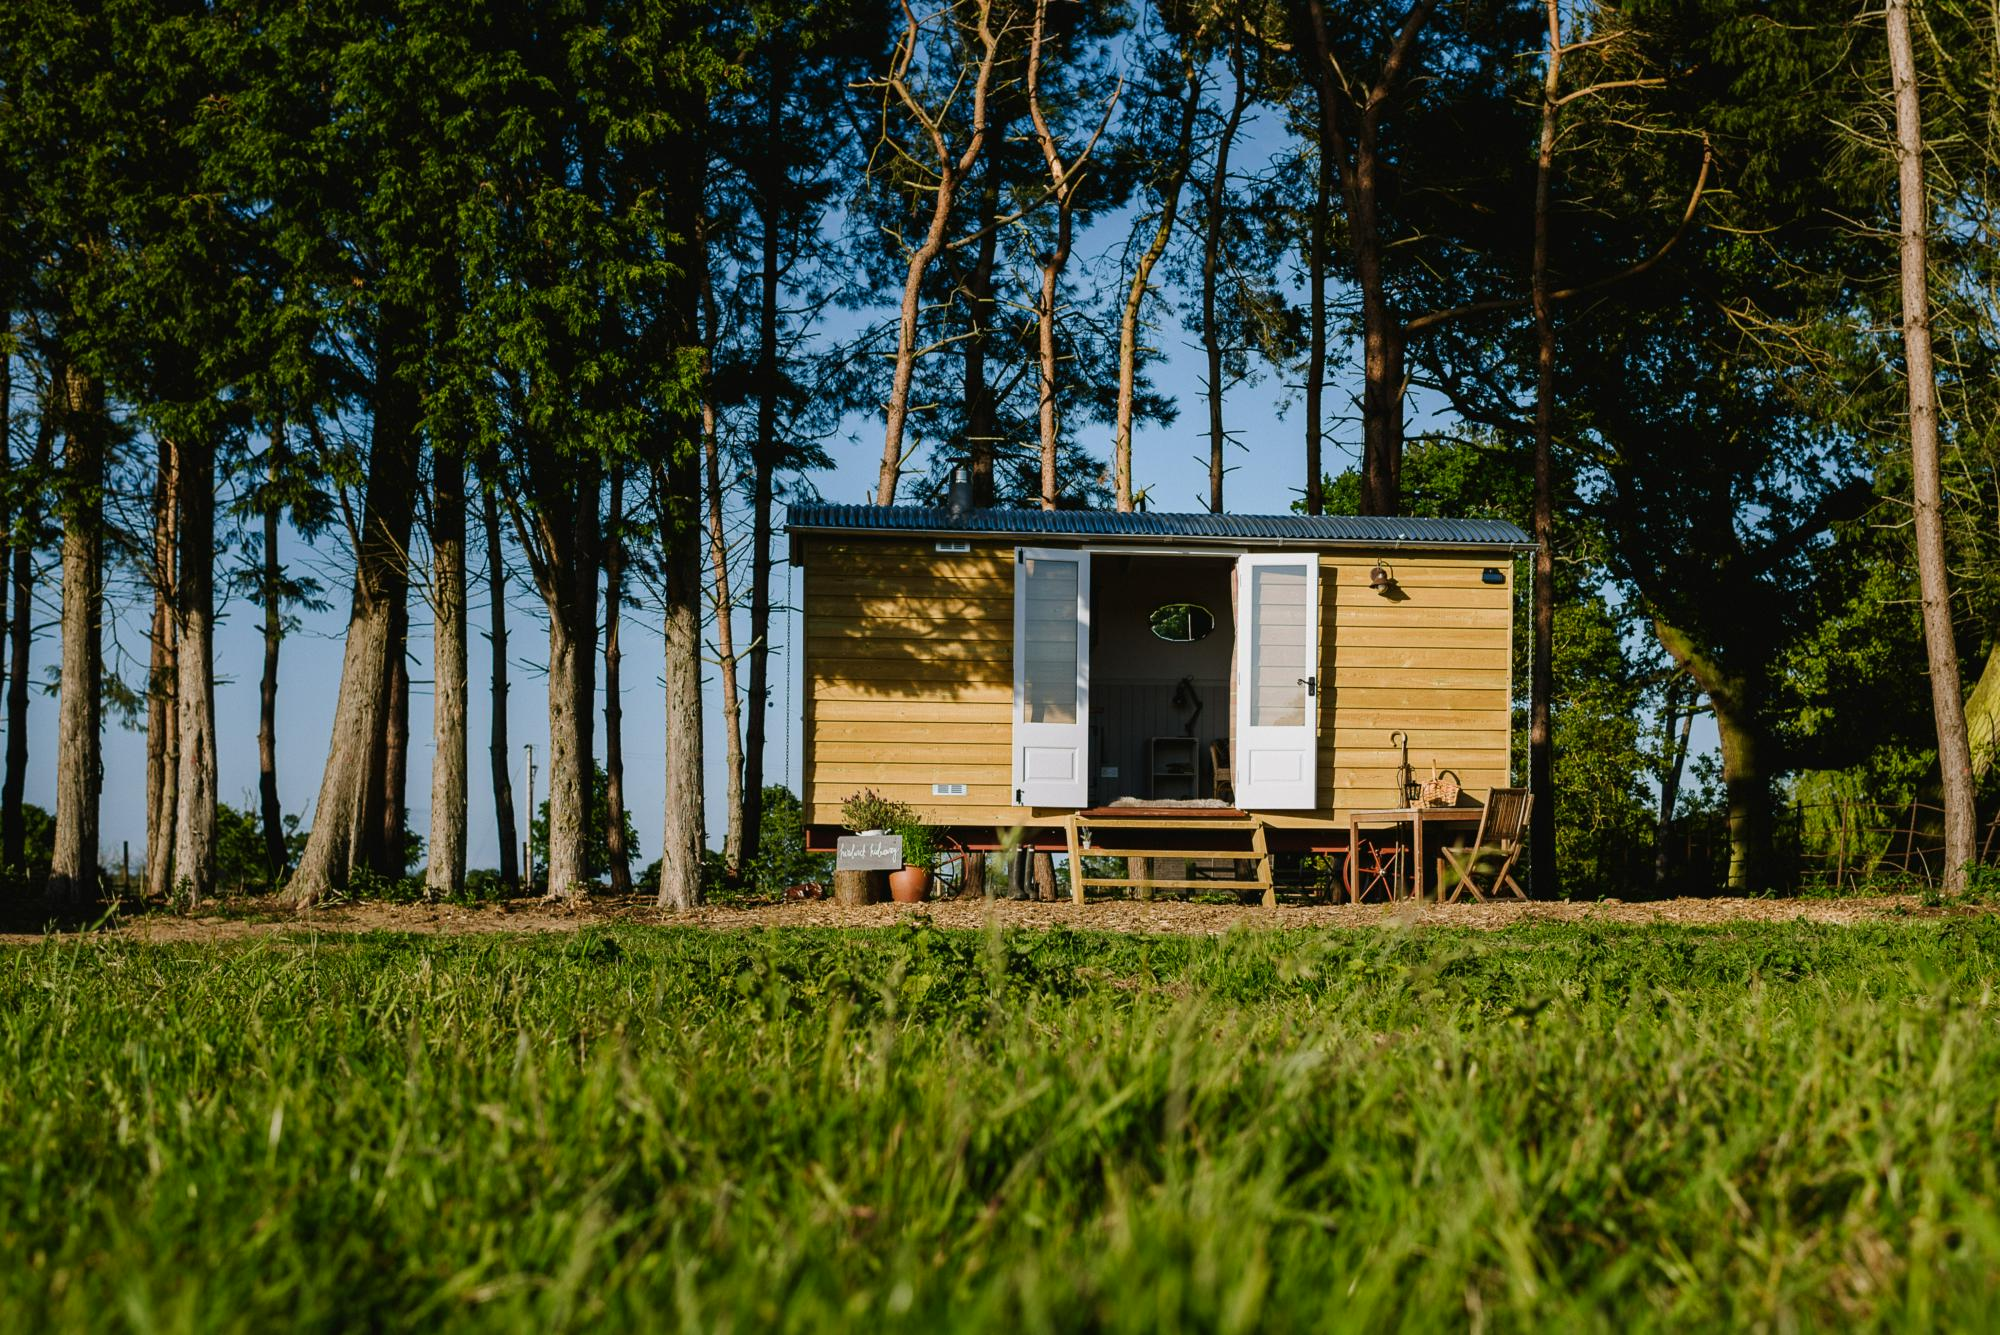 Cool places offers fantastic glamping in norfolk. With fabulous huts and lodges to become one with the wildlife